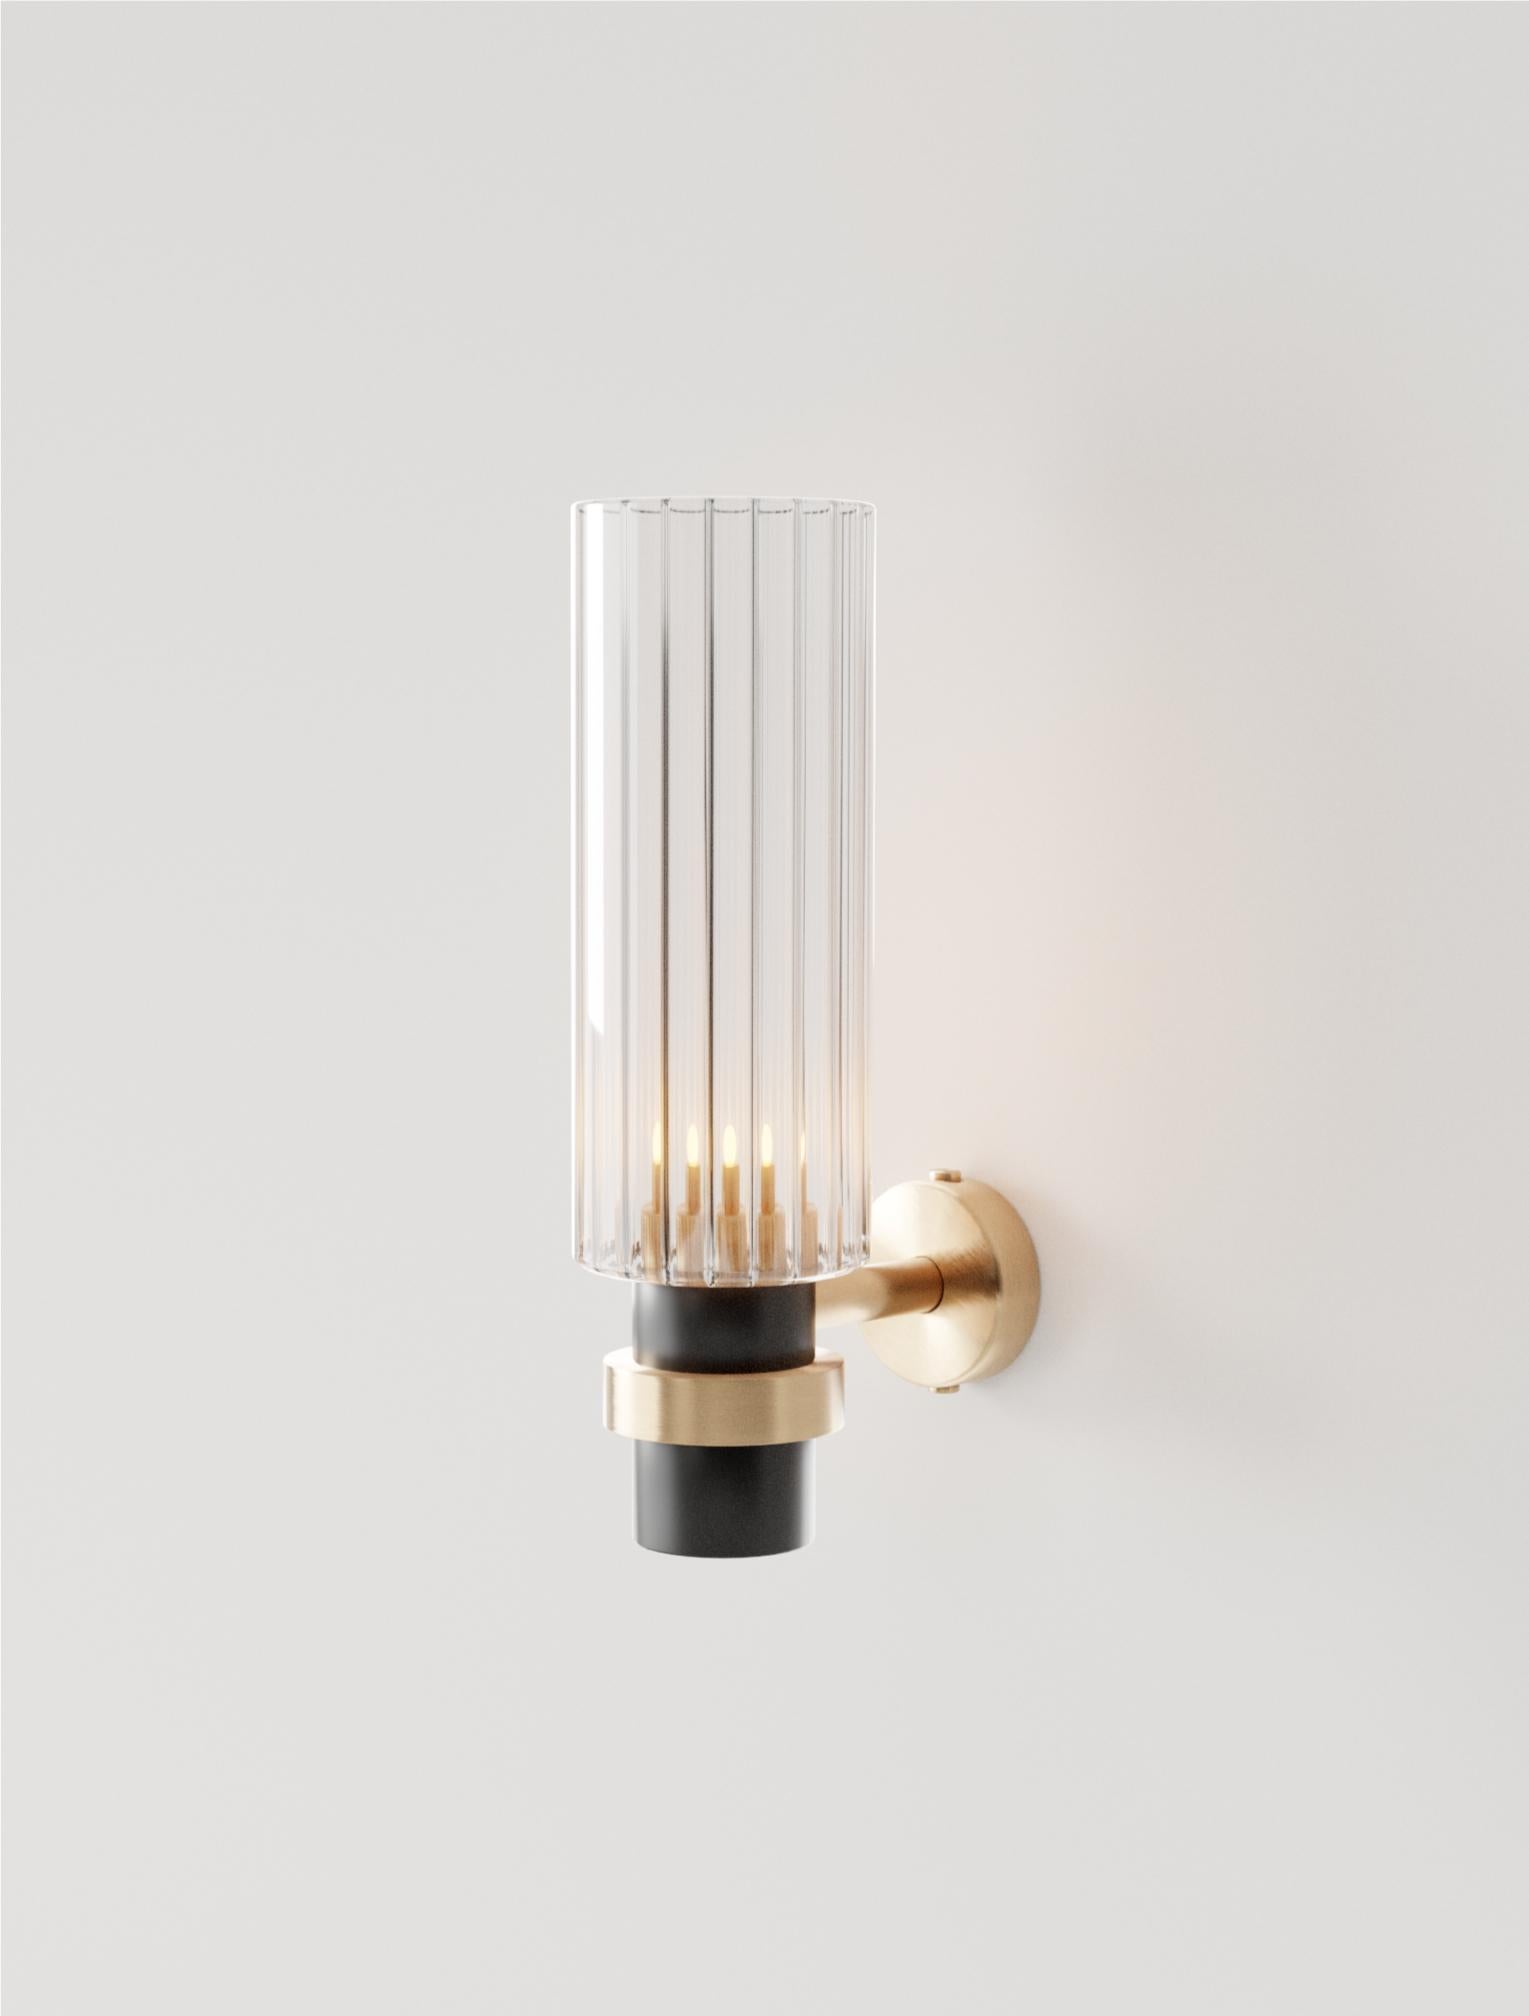 Aluminum 21st C Contemporary Marine Breynaert Wall Sconce Lamp Brushed Brass Glass Black For Sale